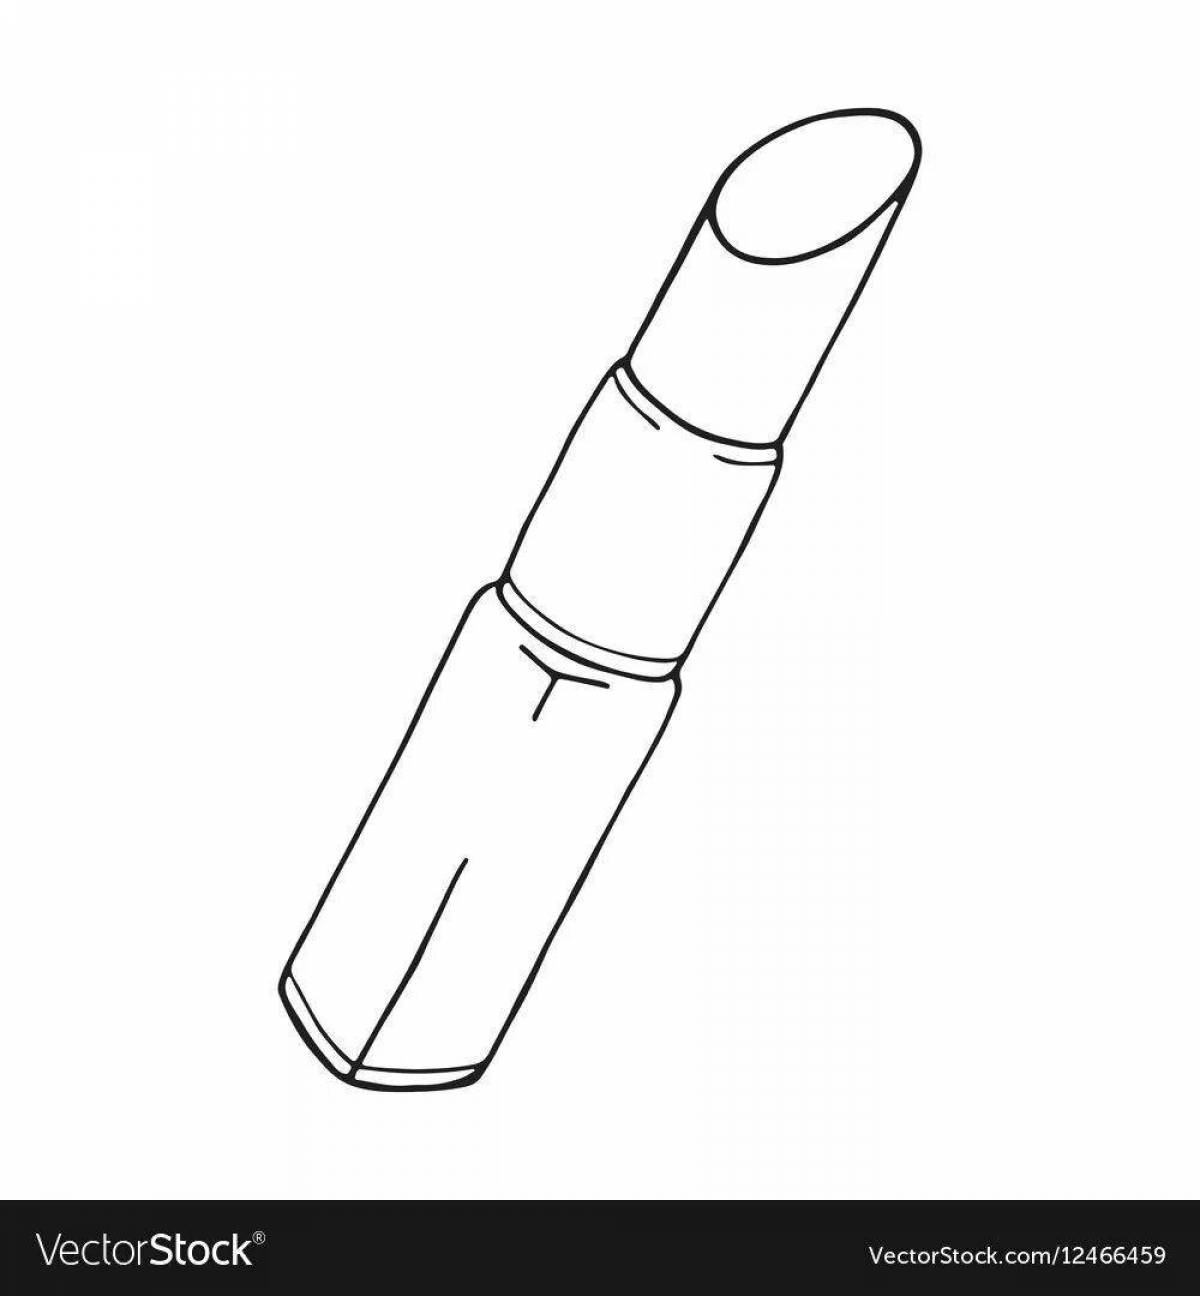 Flawless Lipstick Coloring Page for Babies